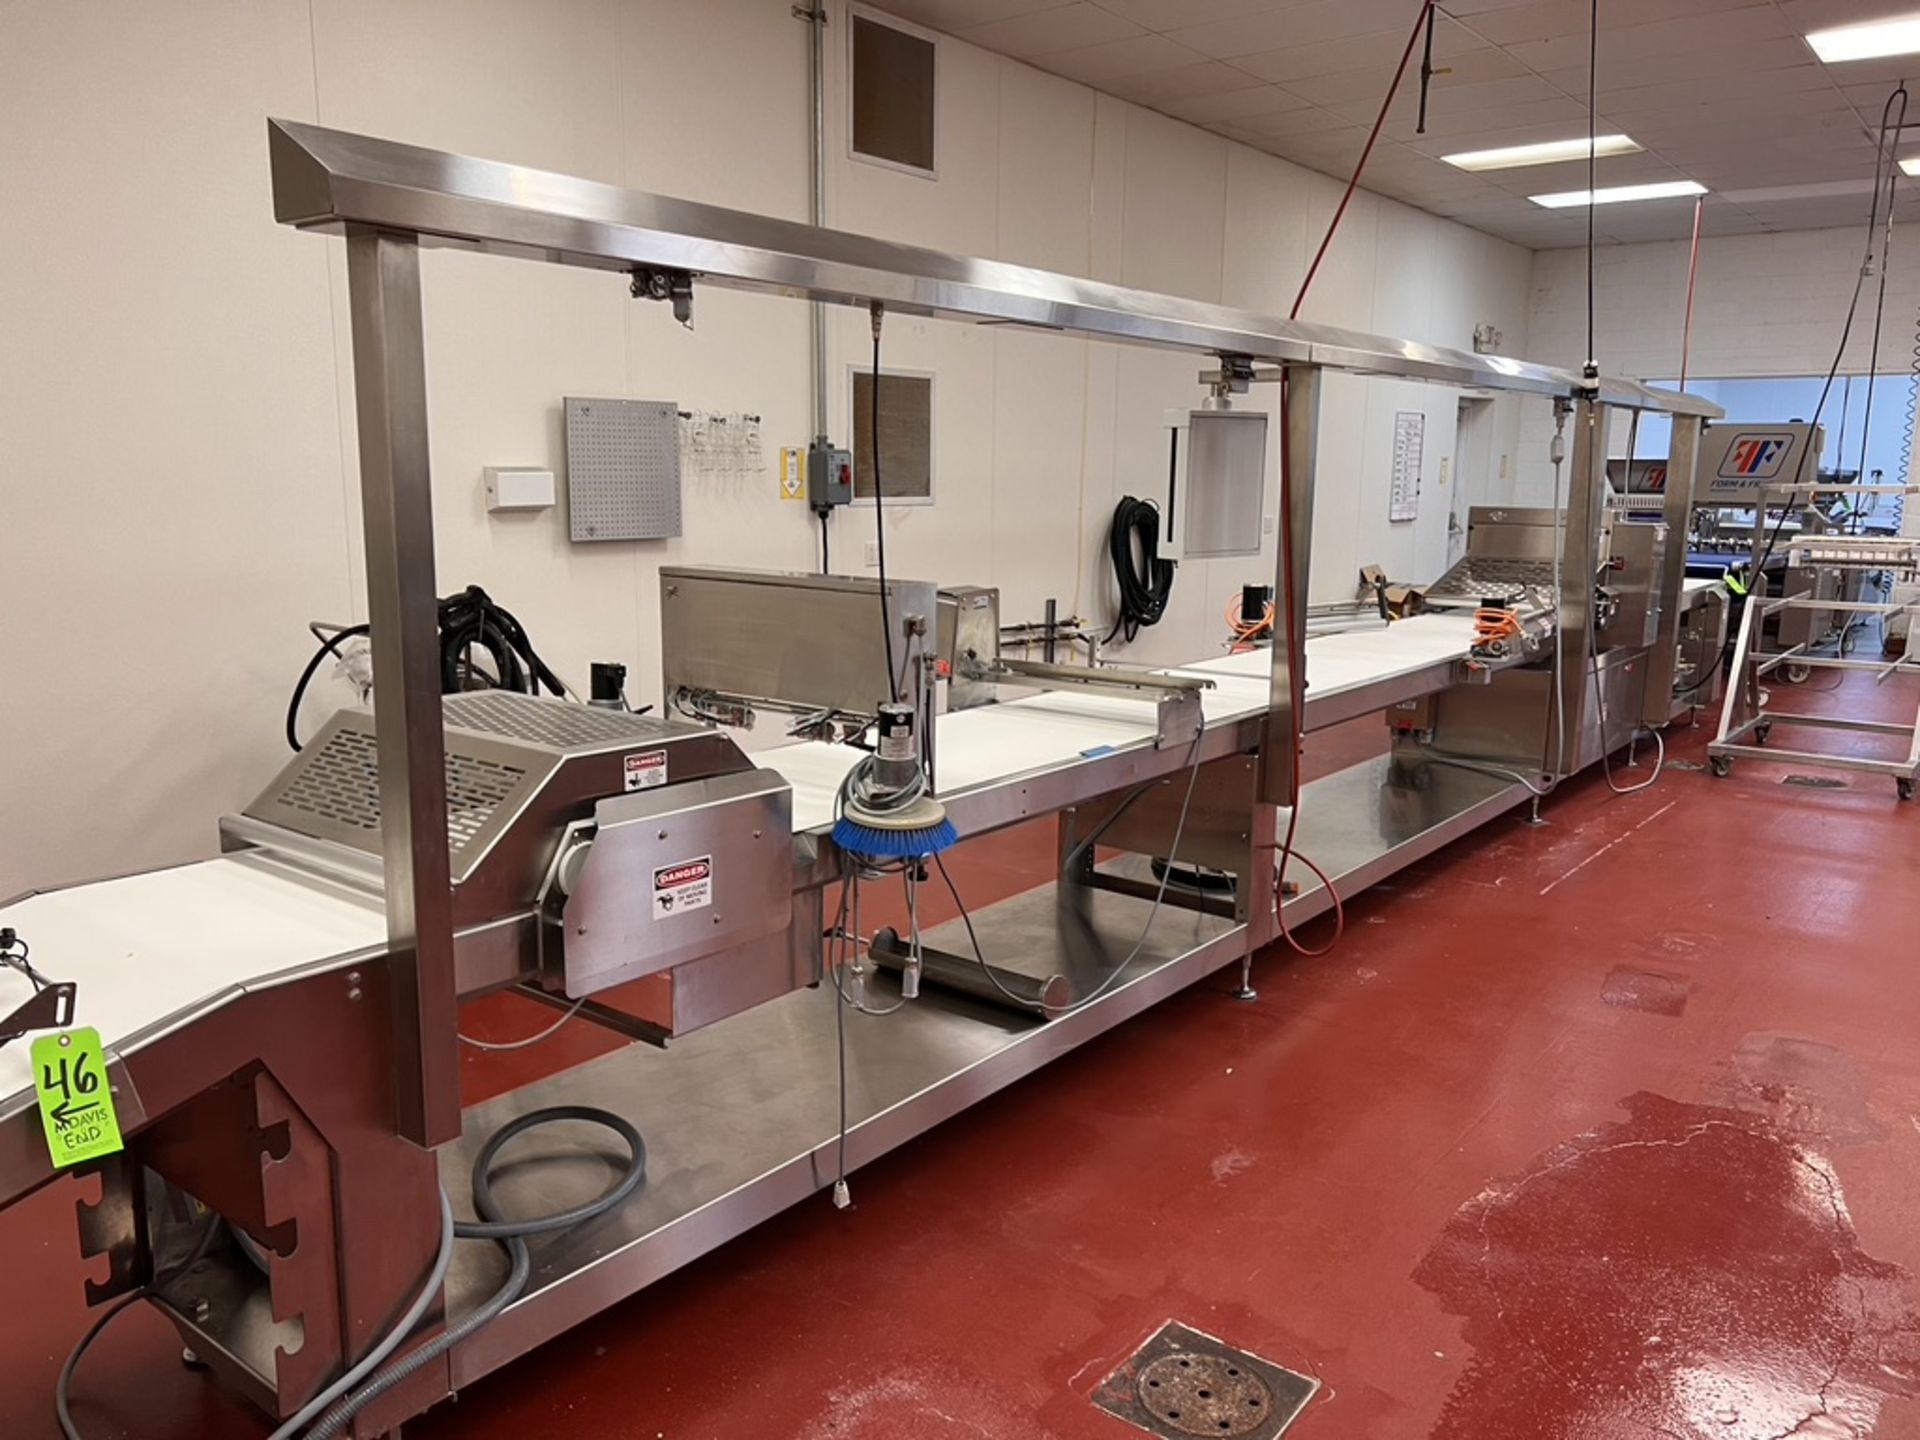 2019 RONDO SHEETING LINE, INCLUDES STRIP CUTTER SECTION, WATER / GREASE APPLICATOR, BAR FORMER, - Image 9 of 11